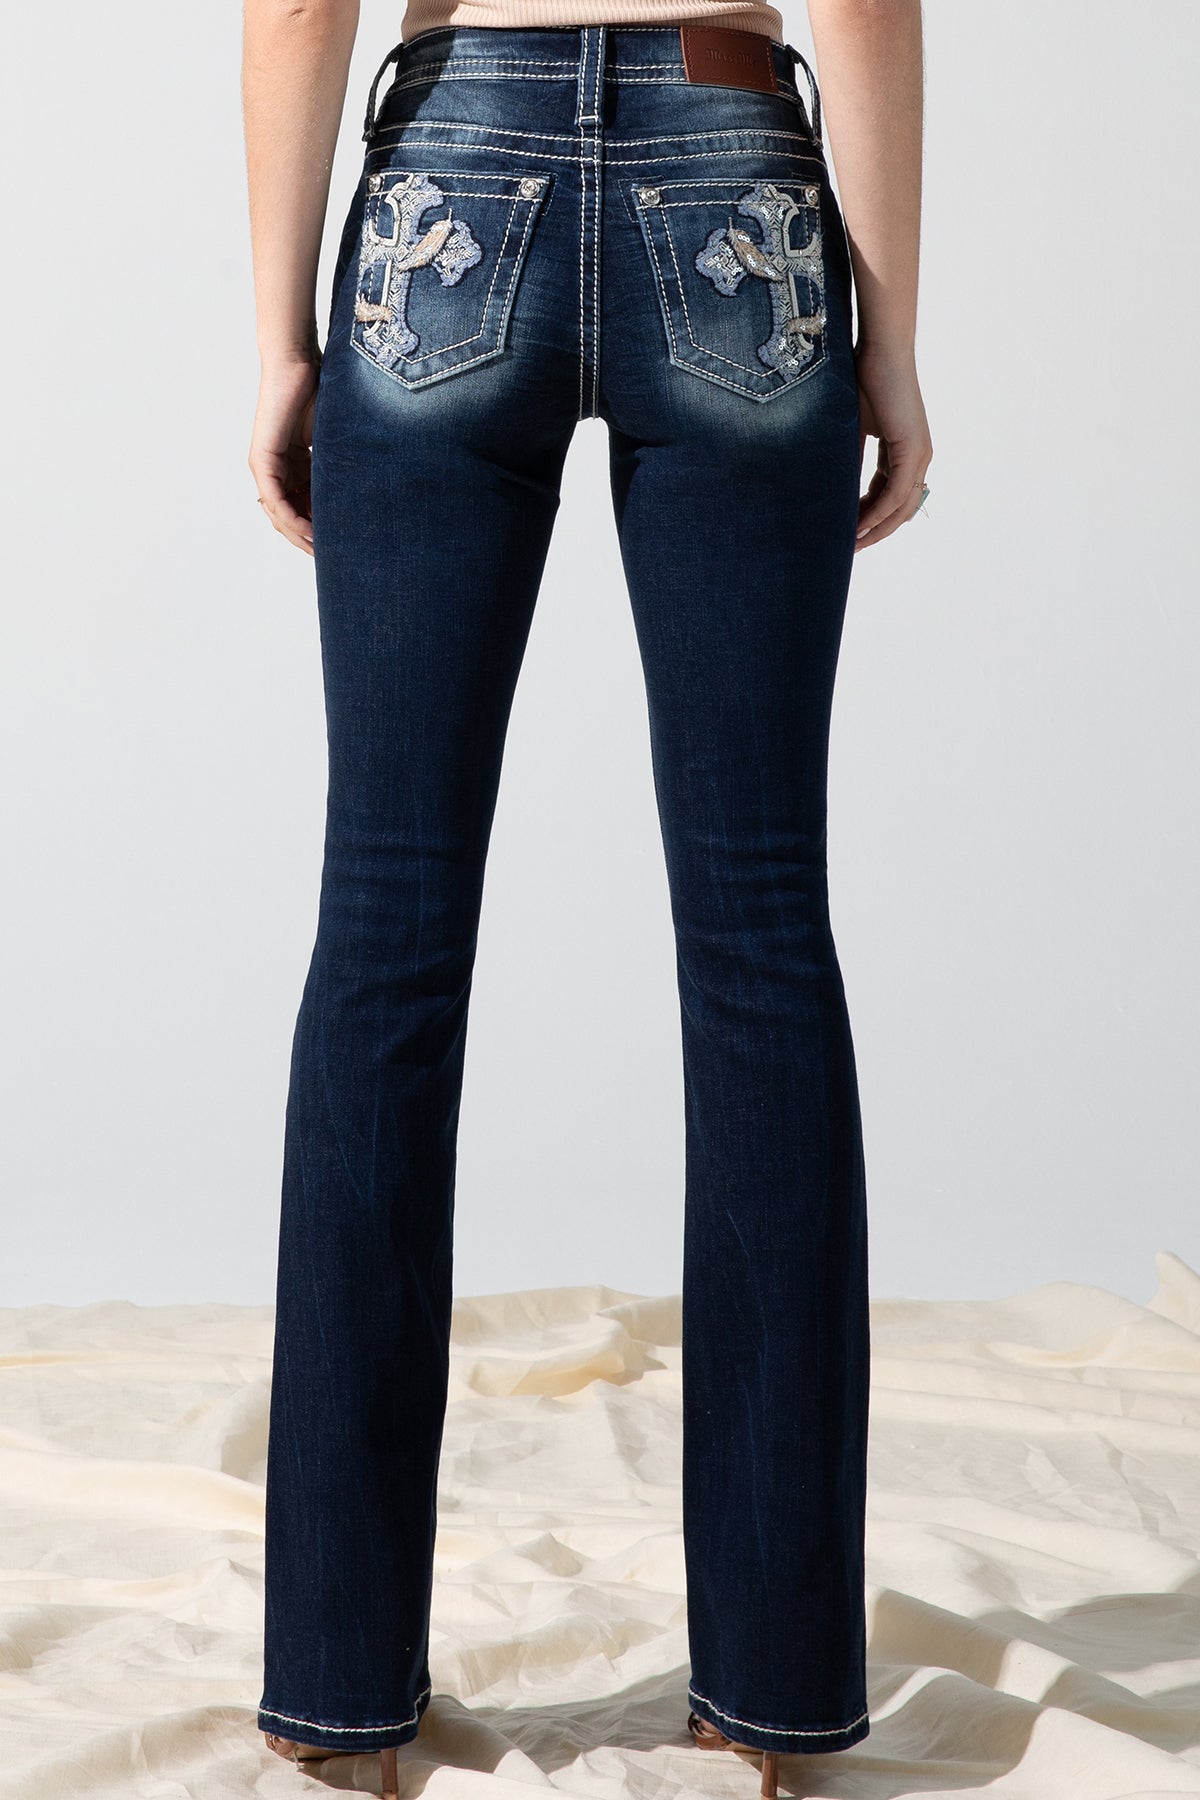 Kakadu At lyve mover Feathered Cross Bootcut Jeans – Miss Me